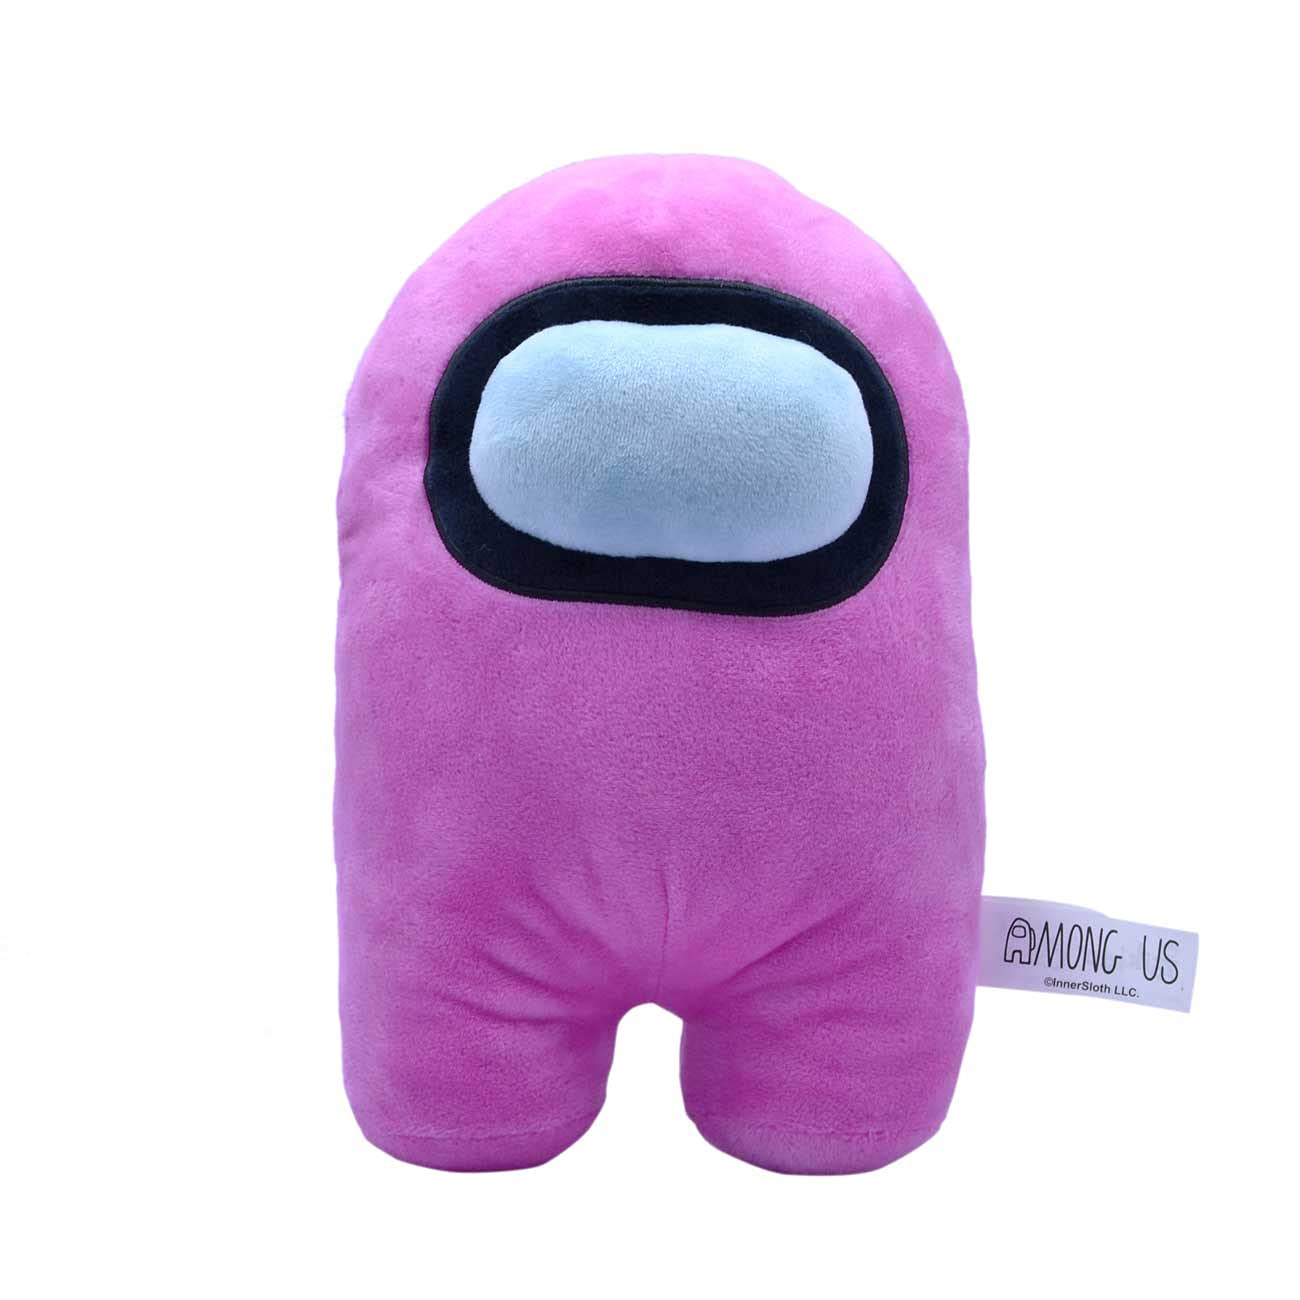 9" Just Toys LLC Among Us Plush Toy (Pink) $5 + Free Shipping w/ Prime or on $25+